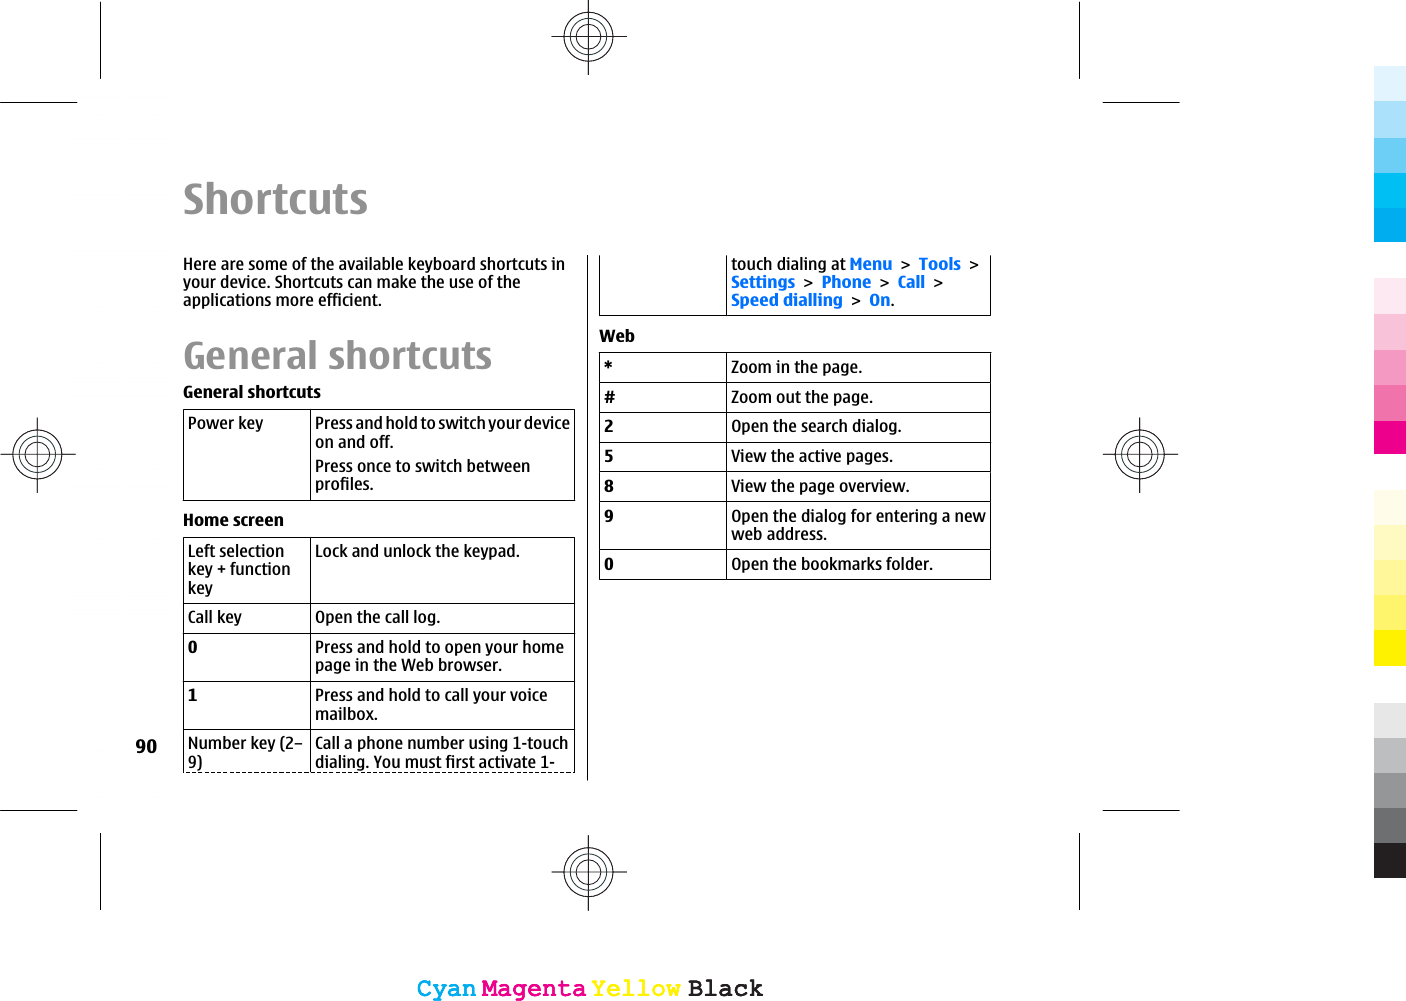 ShortcutsHere are some of the available keyboard shortcuts inyour device. Shortcuts can make the use of theapplications more efficient.General shortcutsGeneral shortcutsPower key Press and hold to switch your deviceon and off.Press once to switch betweenprofiles.Home screenLeft selectionkey + functionkeyLock and unlock the keypad.Call key Open the call log.0Press and hold to open your homepage in the Web browser.1Press and hold to call your voicemailbox.Number key (2–9)Call a phone number using 1-touchdialing. You must first activate 1-touch dialing at MenuToolsSettingsPhoneCallSpeed diallingOn.Web*Zoom in the page.#Zoom out the page.2Open the search dialog.5View the active pages.8View the page overview.9Open the dialog for entering a newweb address.0Open the bookmarks folder.90CyanCyanMagentaMagentaYellowYellowBlackBlackCyanCyanMagentaMagentaYellowYellowBlackBlack